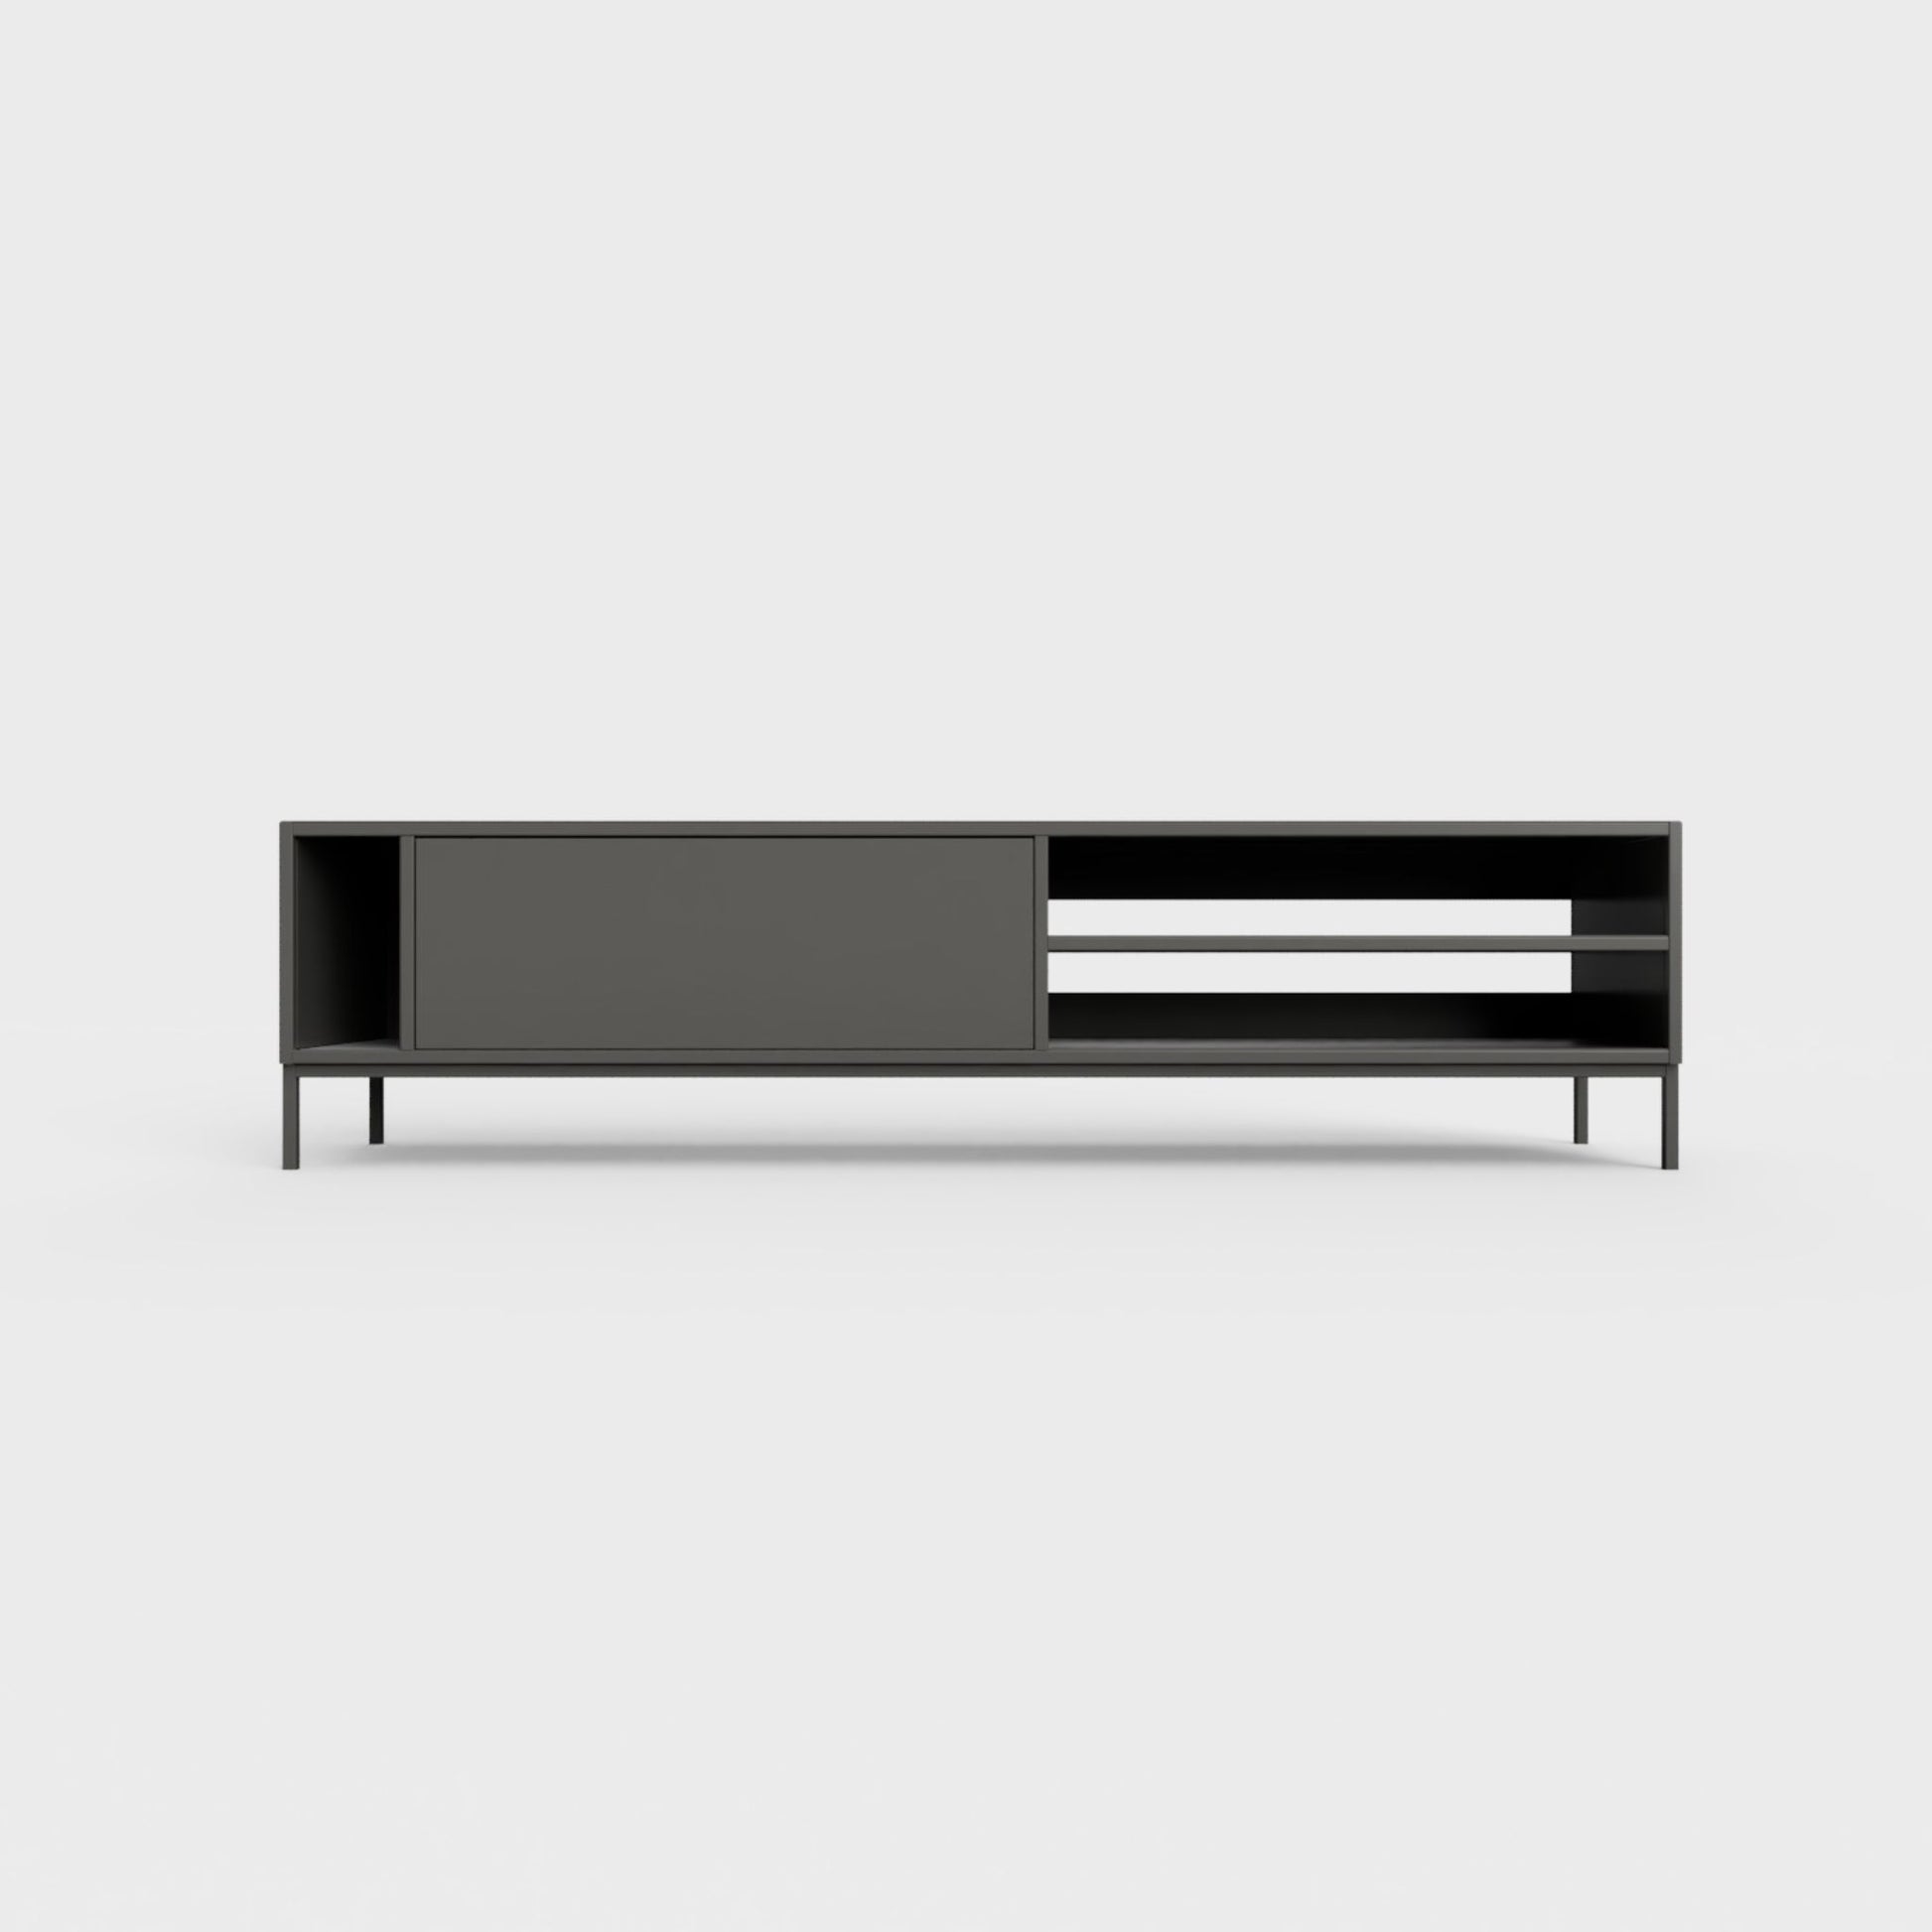 Prunus 03 Lowboard in anthracite gray, powder-coated steel, elegant and modern piece of furniture for your living room